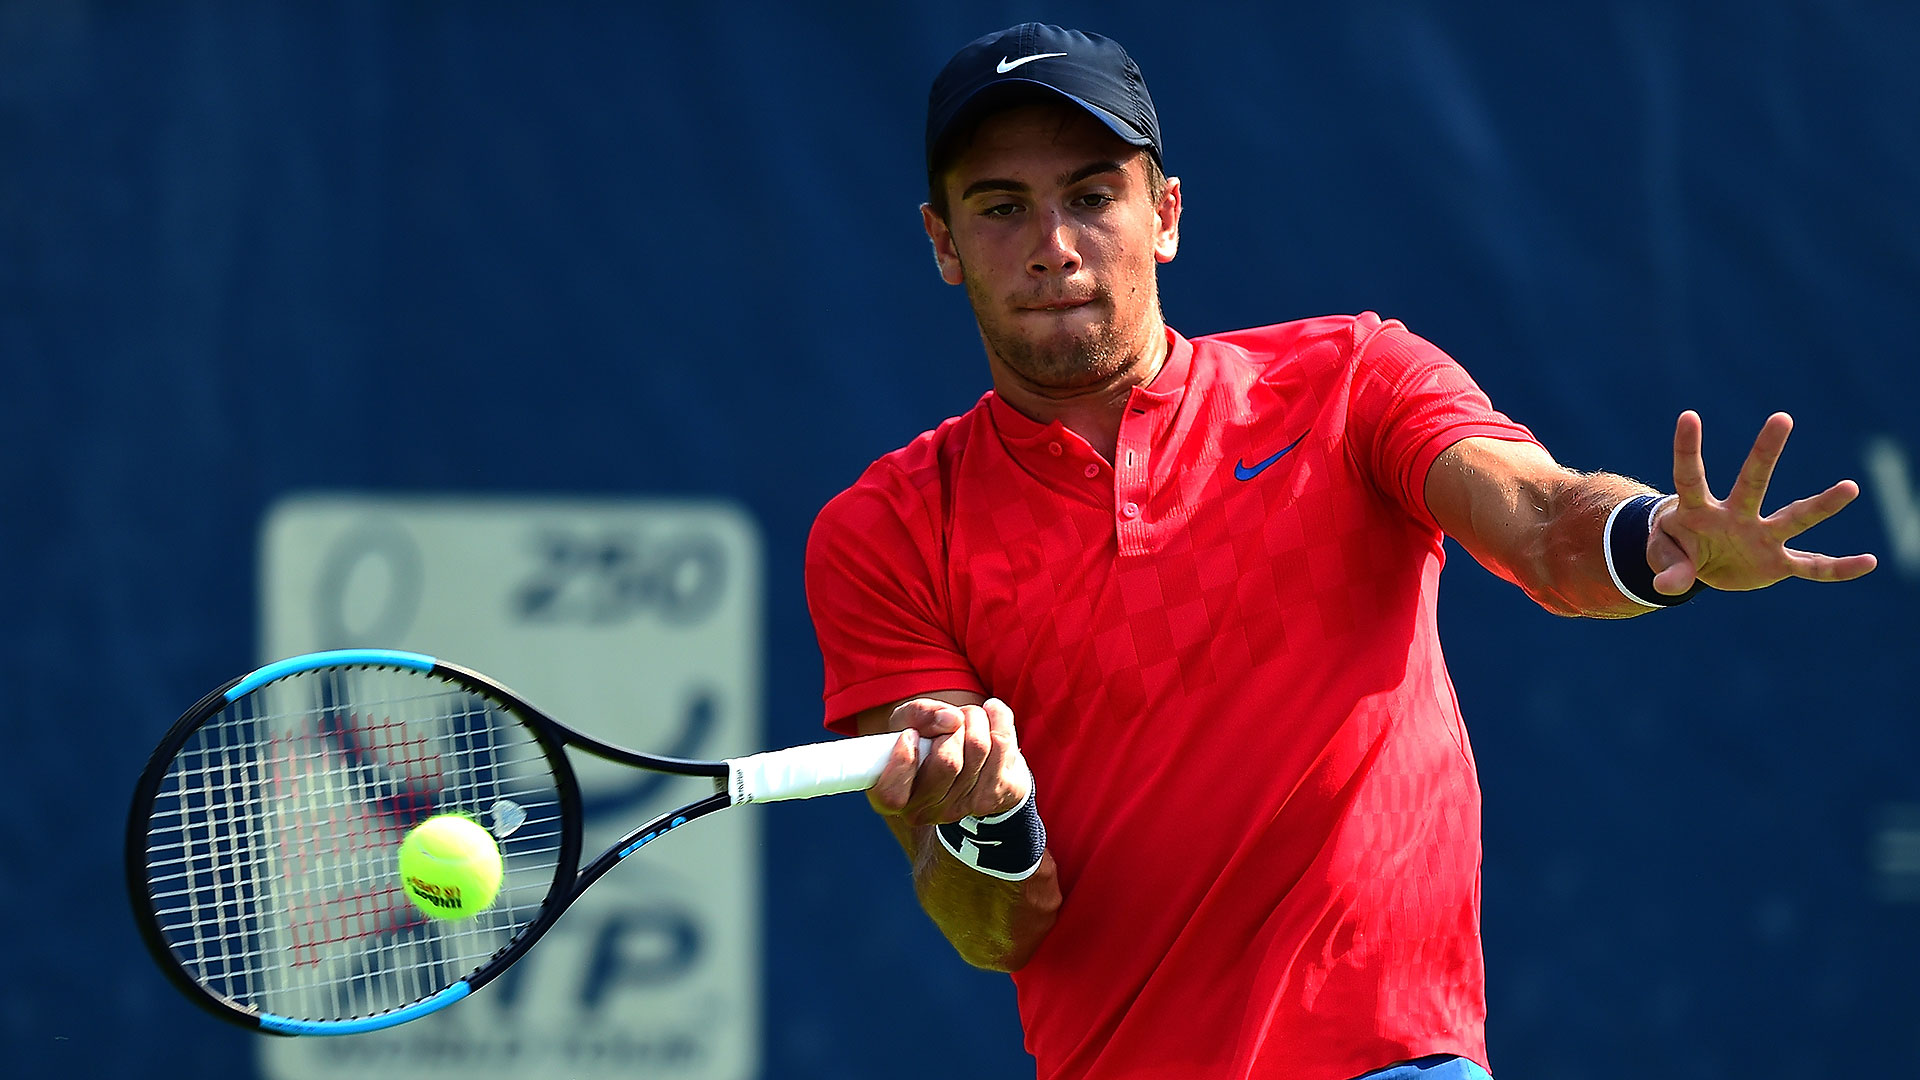 Borna Coric's racquet - What tennis raccquet does Coric play with?